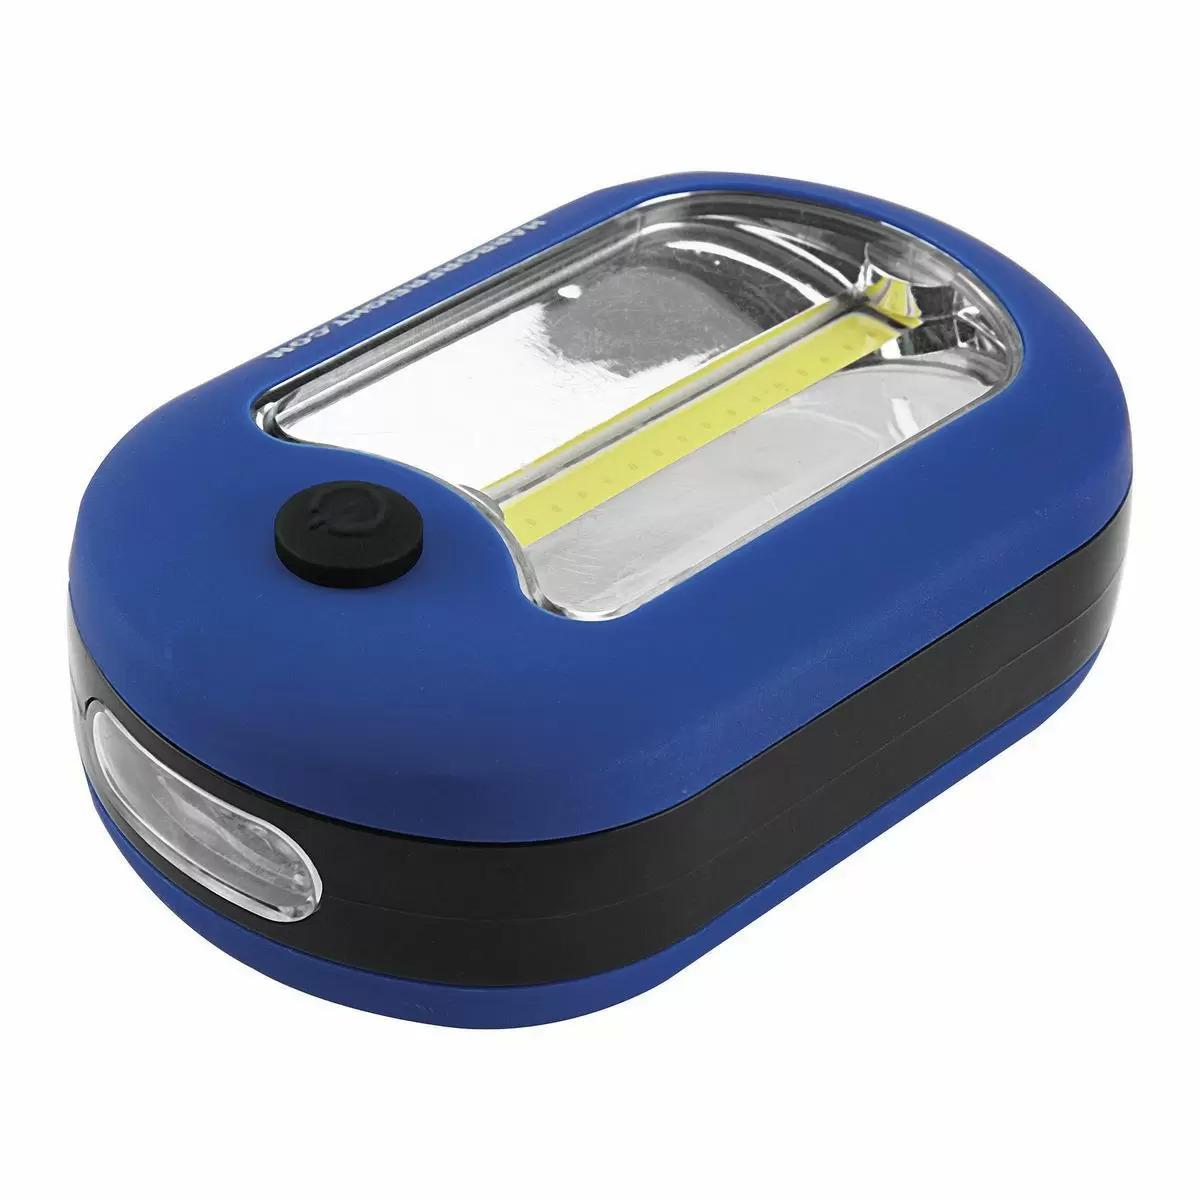 Free 144 Lumen Ultra Bright LED Portable Worklight at Harbor Freight Tools